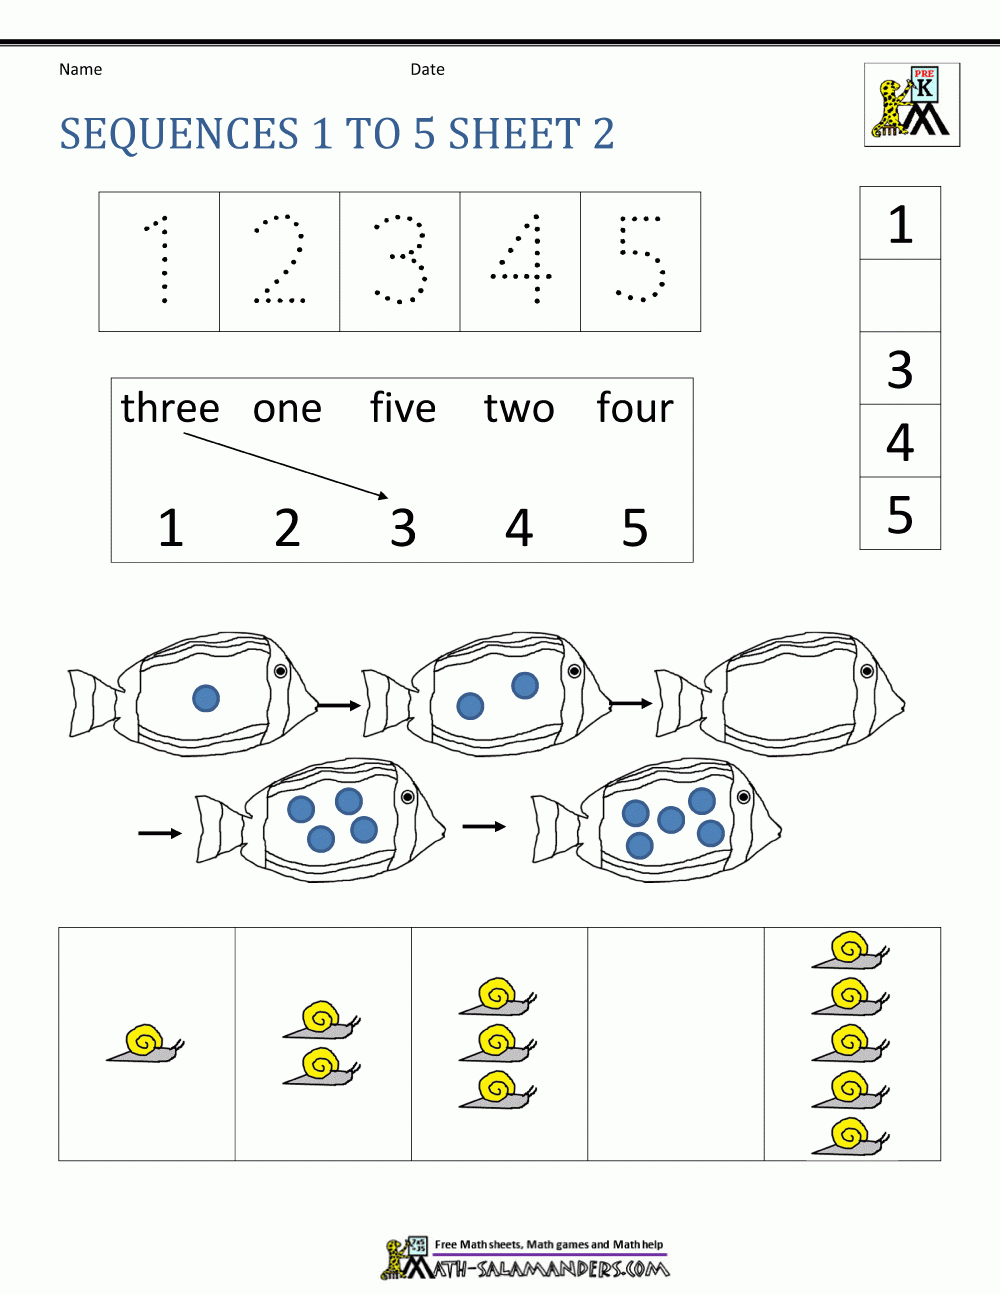 Preschool Number Worksheets - Sequencing To 10 - Free Printable Sequencing Worksheets 2Nd Grade